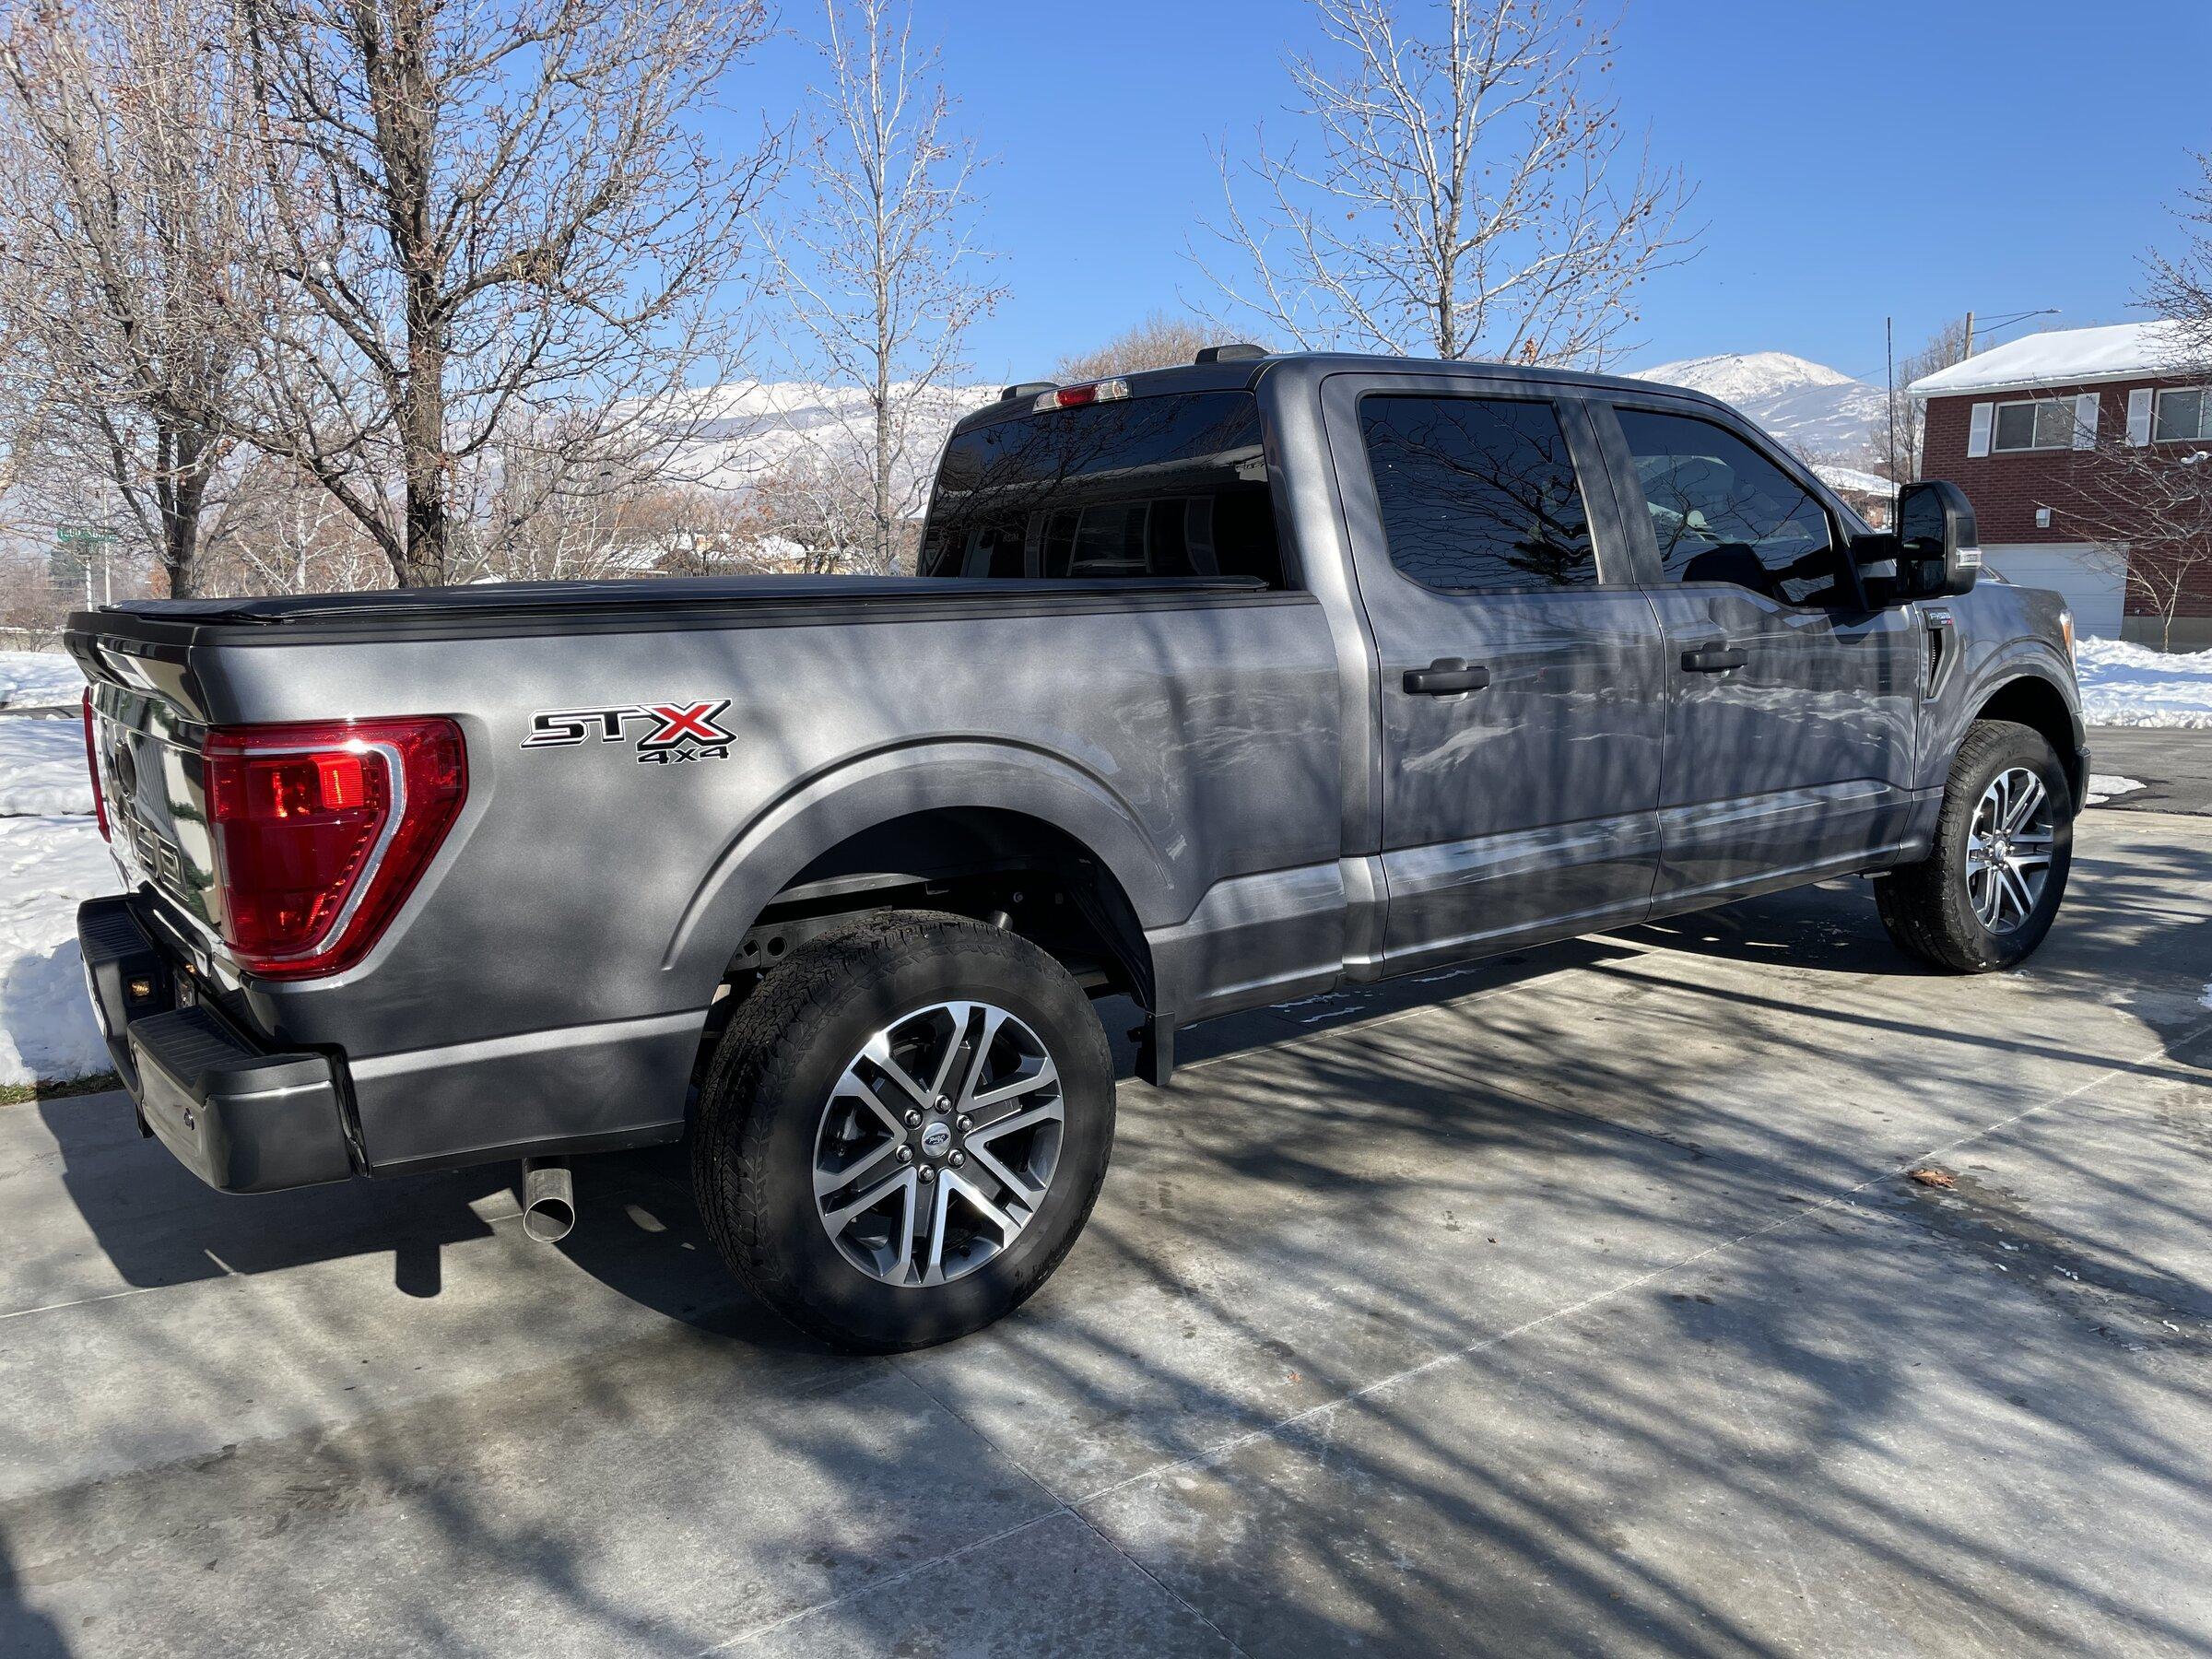 Ford F-150 Lightning Anyone tint front window on Carbonized Grey - '21 F-150? 24DF7A28-7D46-41F0-B0FD-092875D6FE23